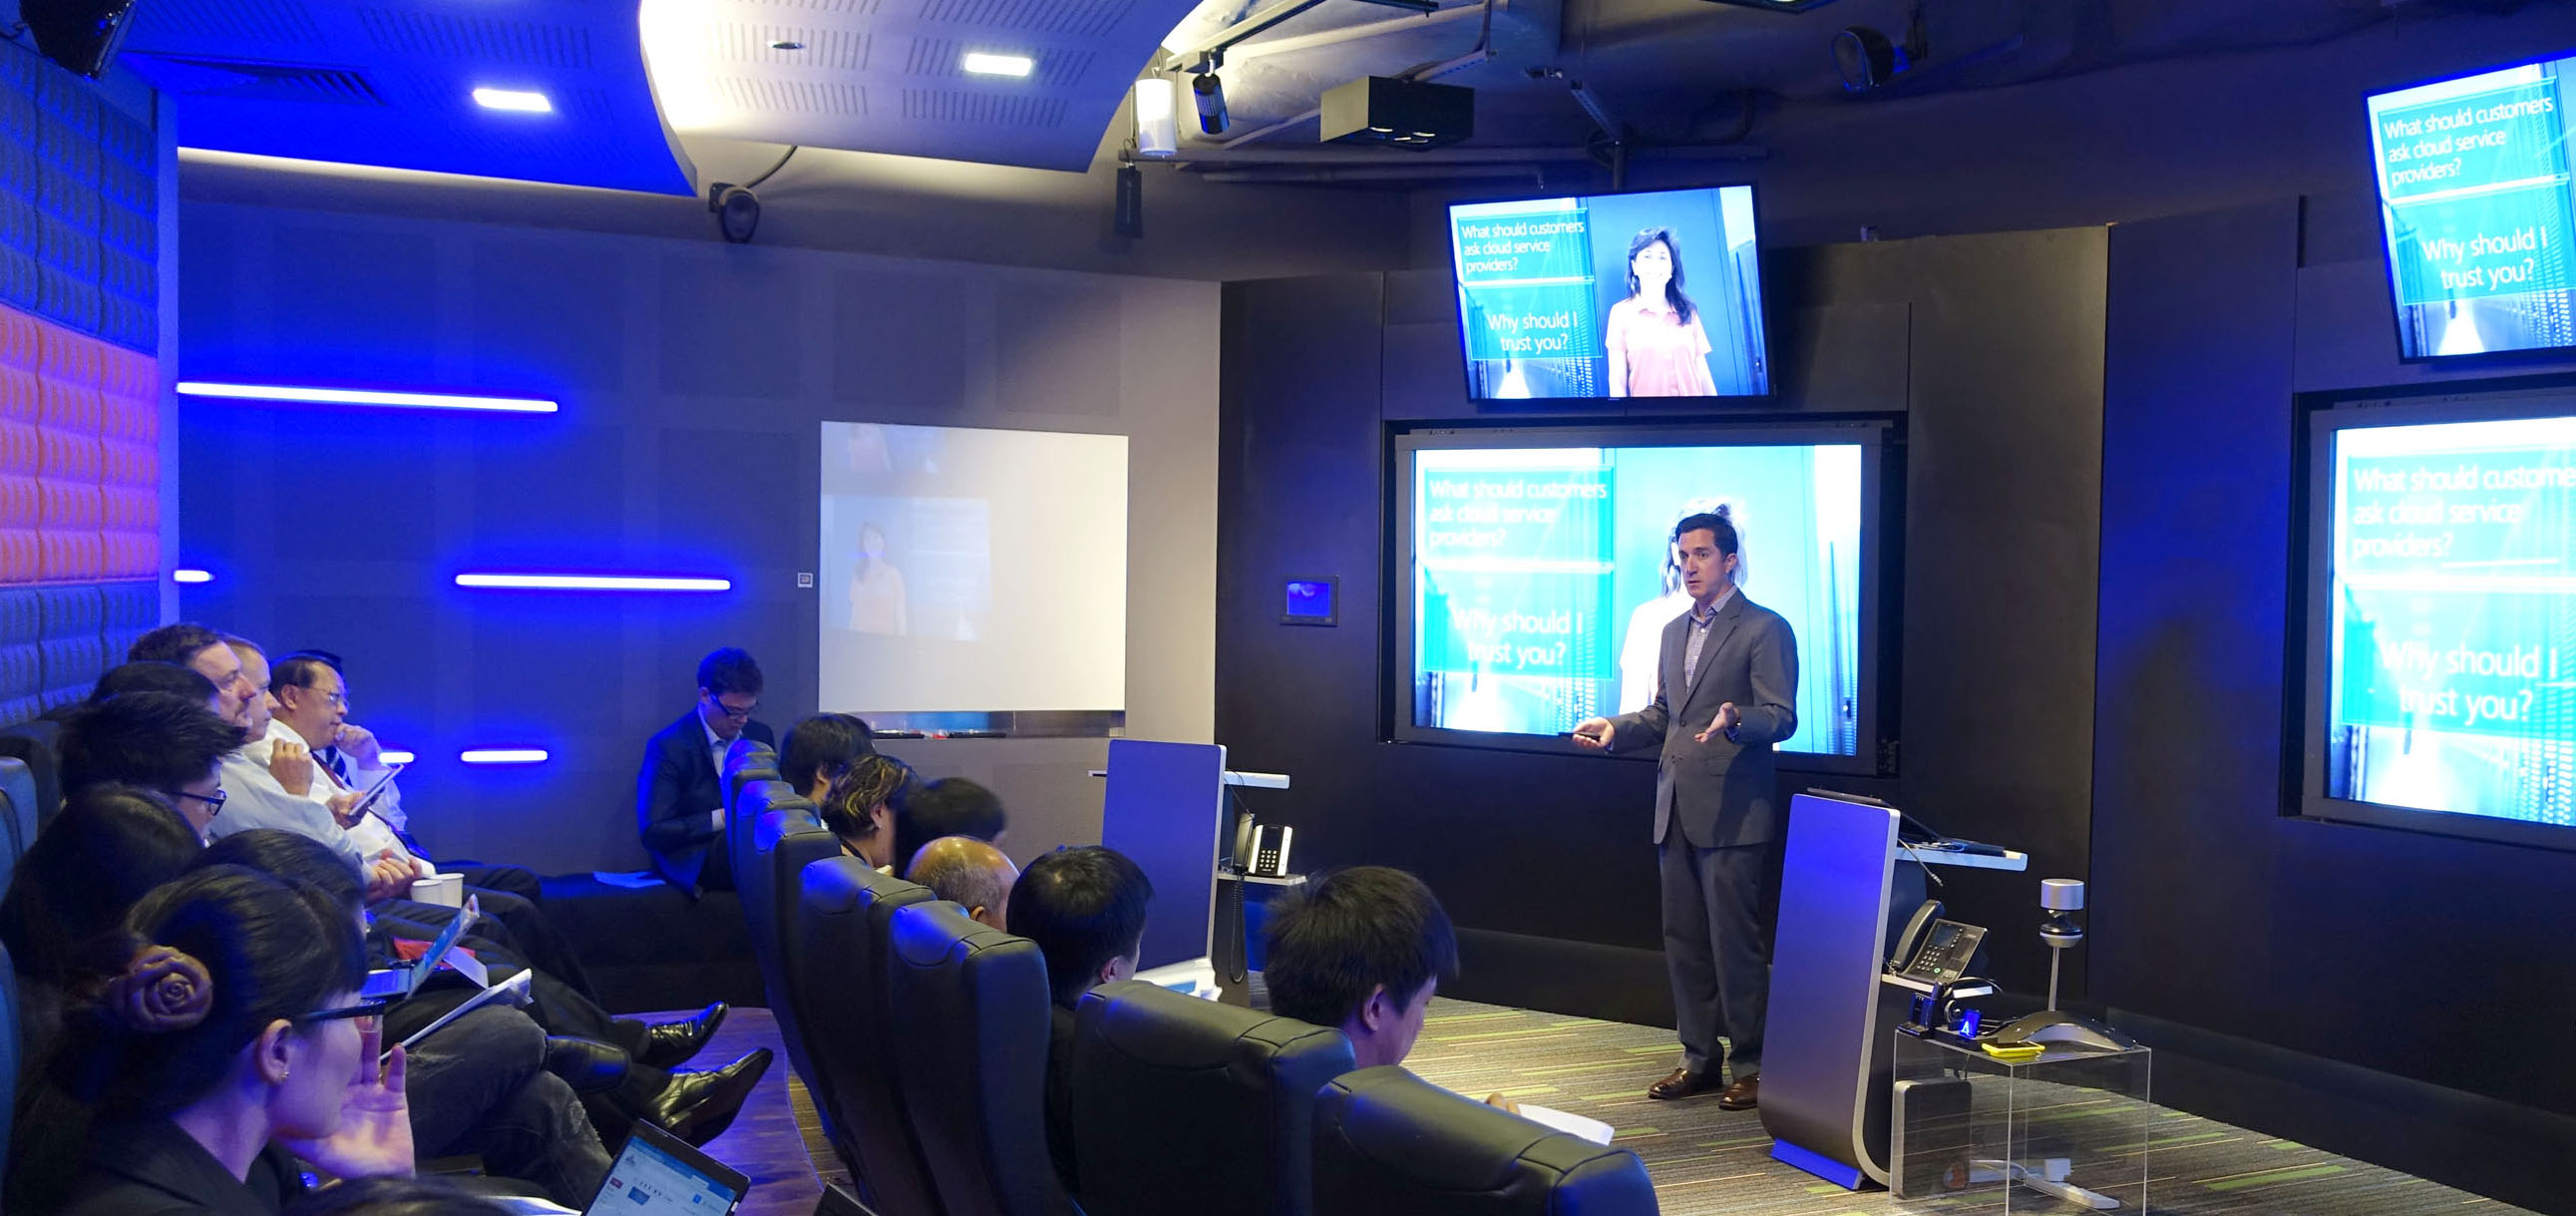 John Galligan, Regional Director, Government Relations, Microsoft Asia Pacific, sharing with media at the Cyber Trust Experience held in Singapore about Microsoft’s commitment to building trust in technology. 